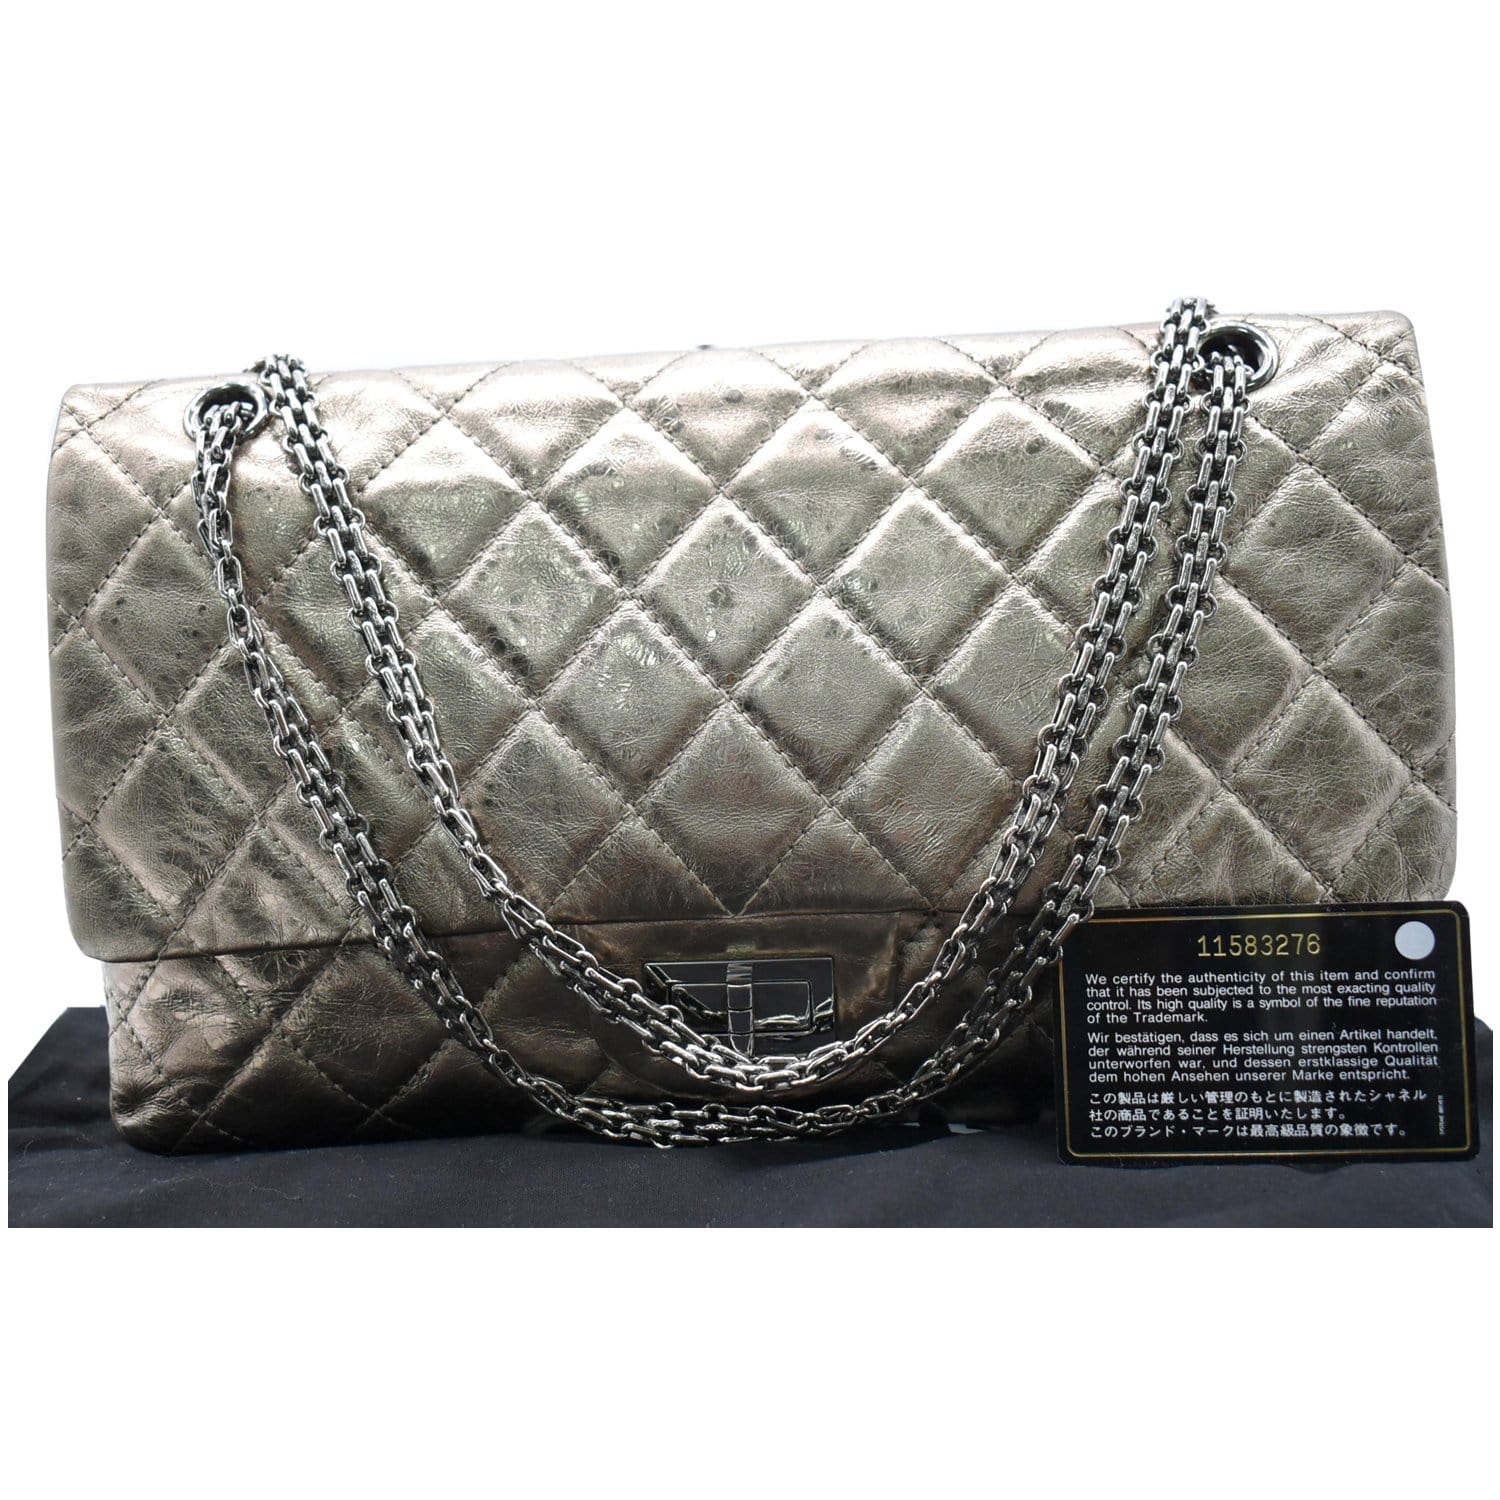 Chanel Reissue 2.55 Bag. The Chanel Reissue 2.55 Bag holds a…, by Jane